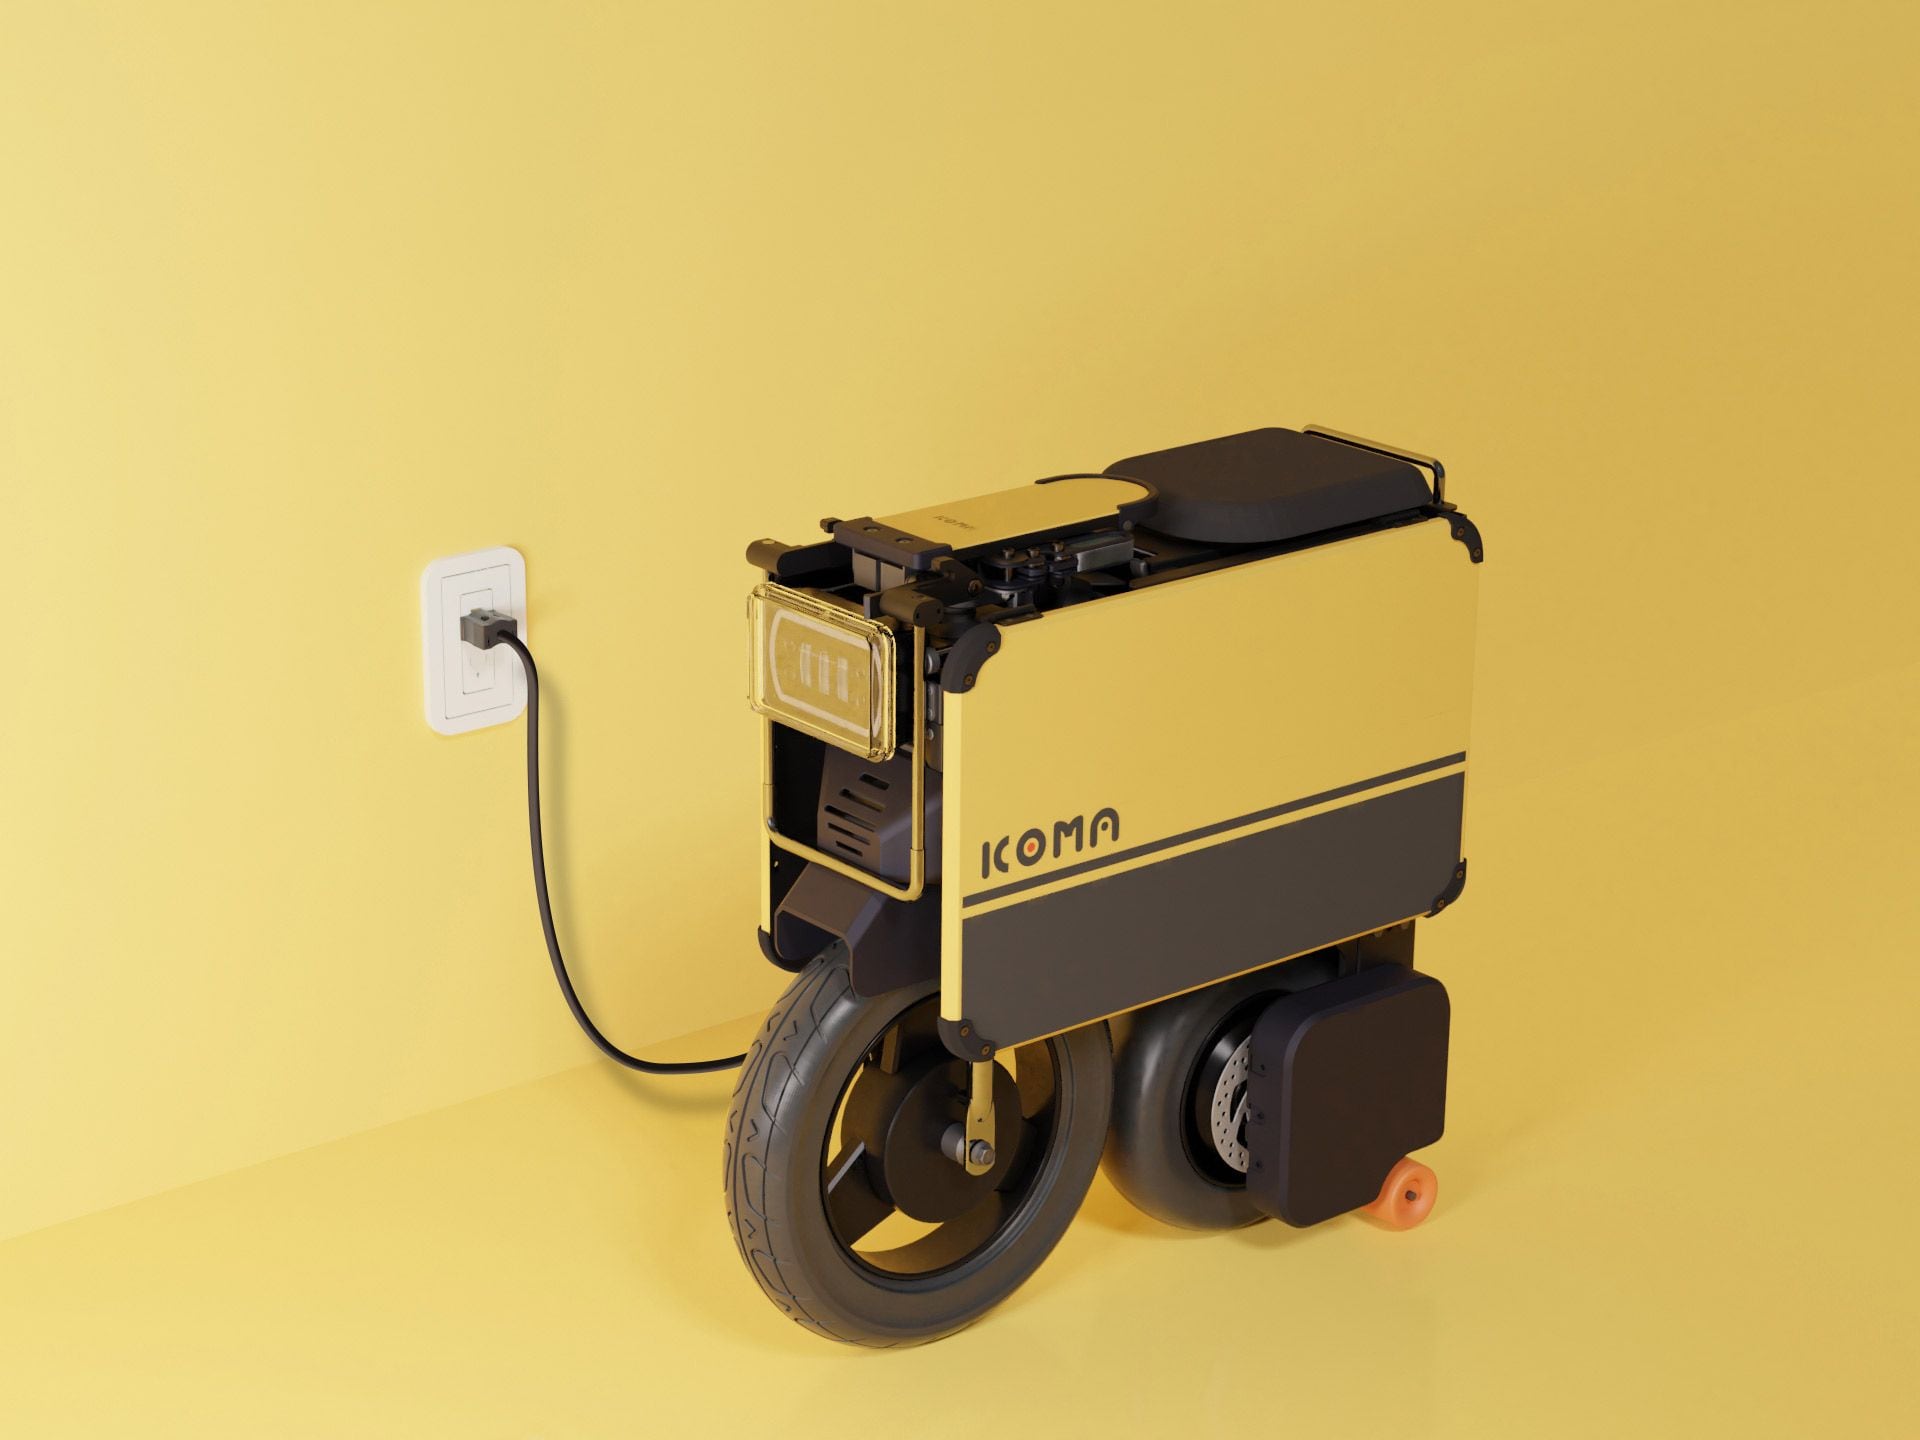 The Tatamel can fully charge its 12Ah battery from a wall socket in about three hours.